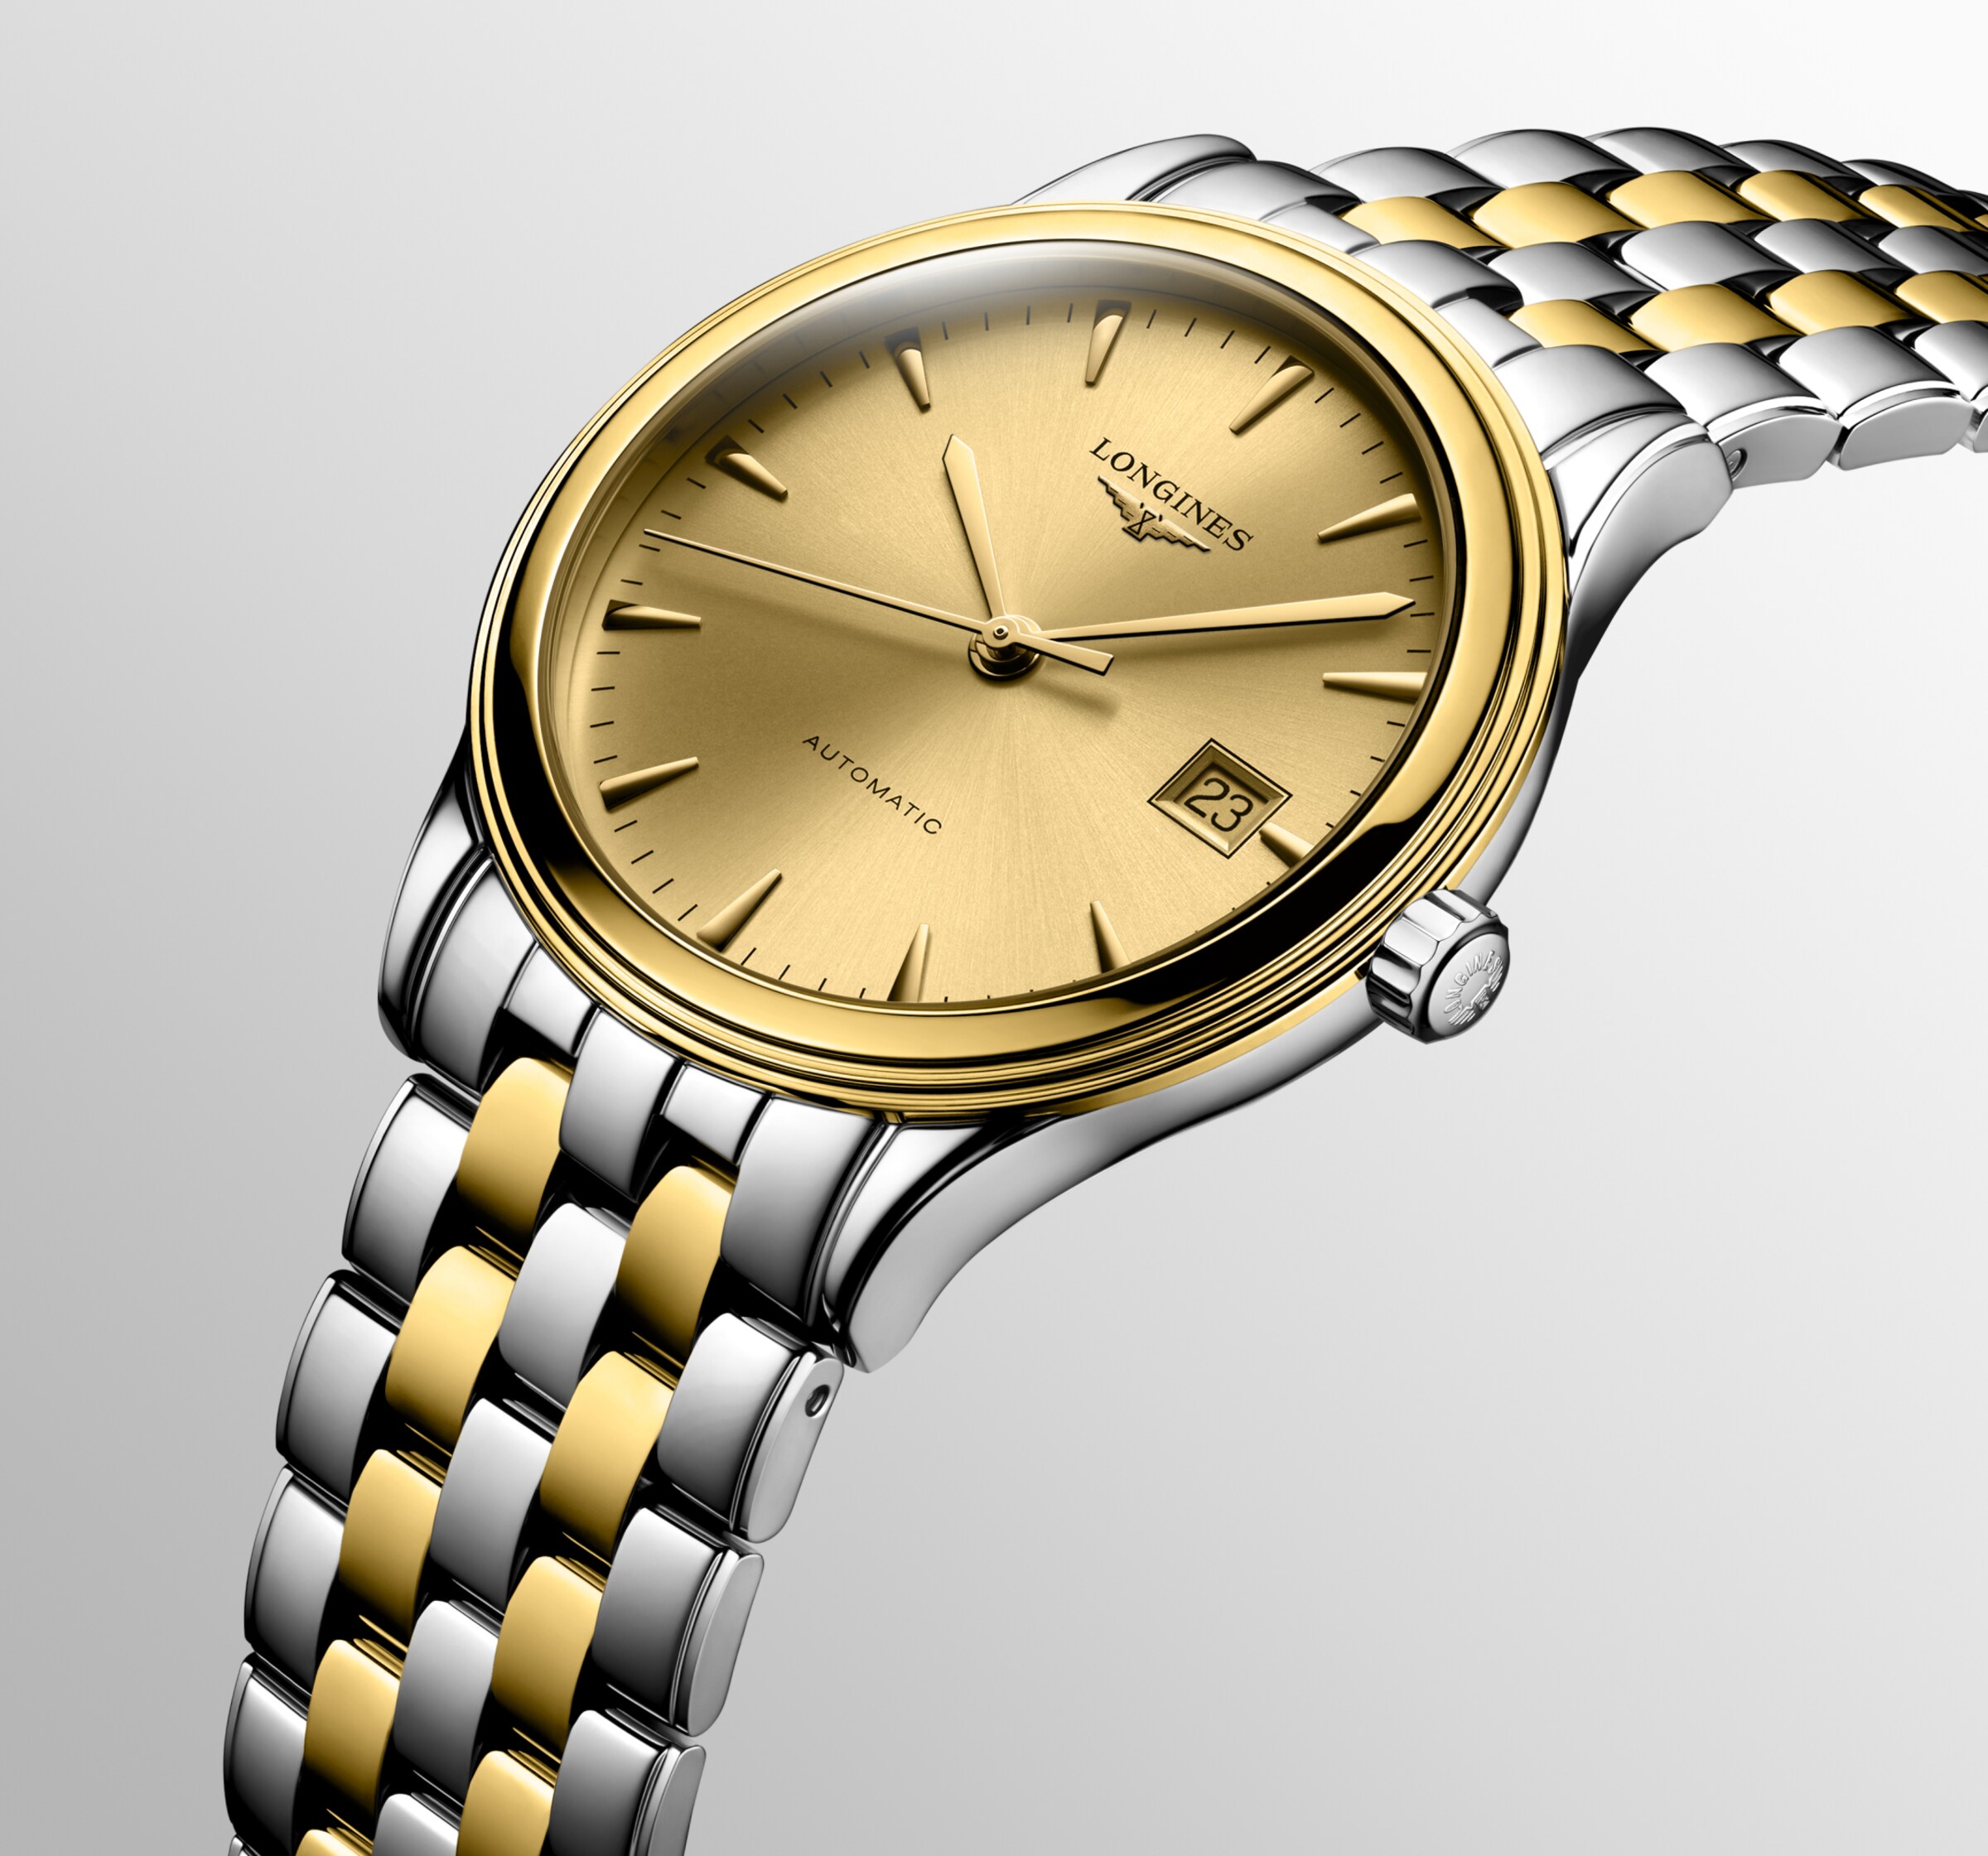 Longines FLAGSHIP Automatic Stainless steel and yellow PVD coating Watch - L4.974.3.32.7